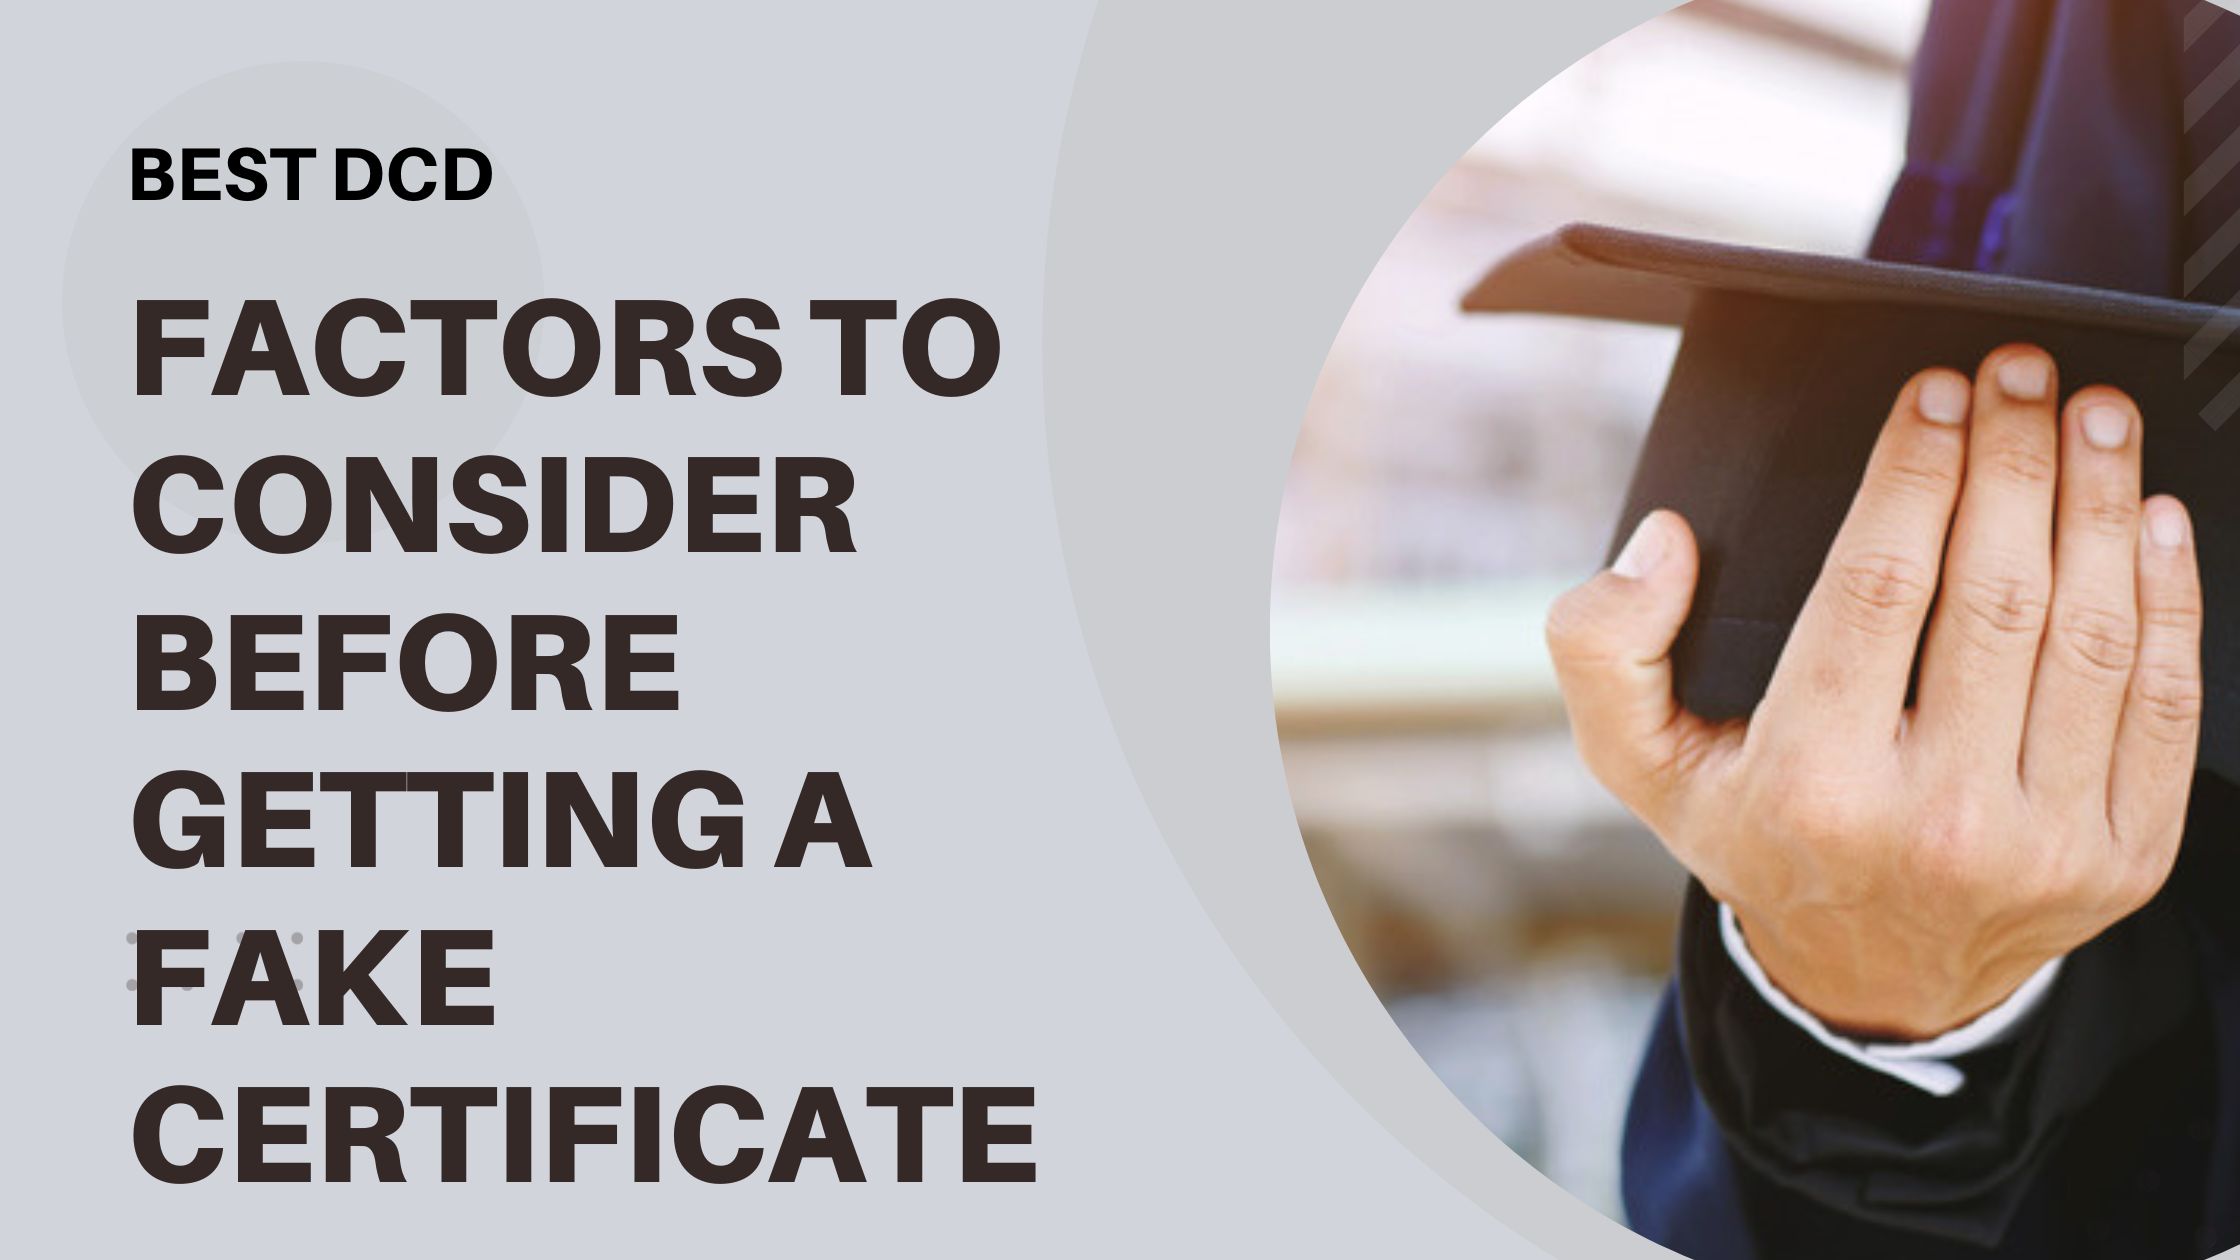 Factors to Consider Before Getting a Fake Certificate